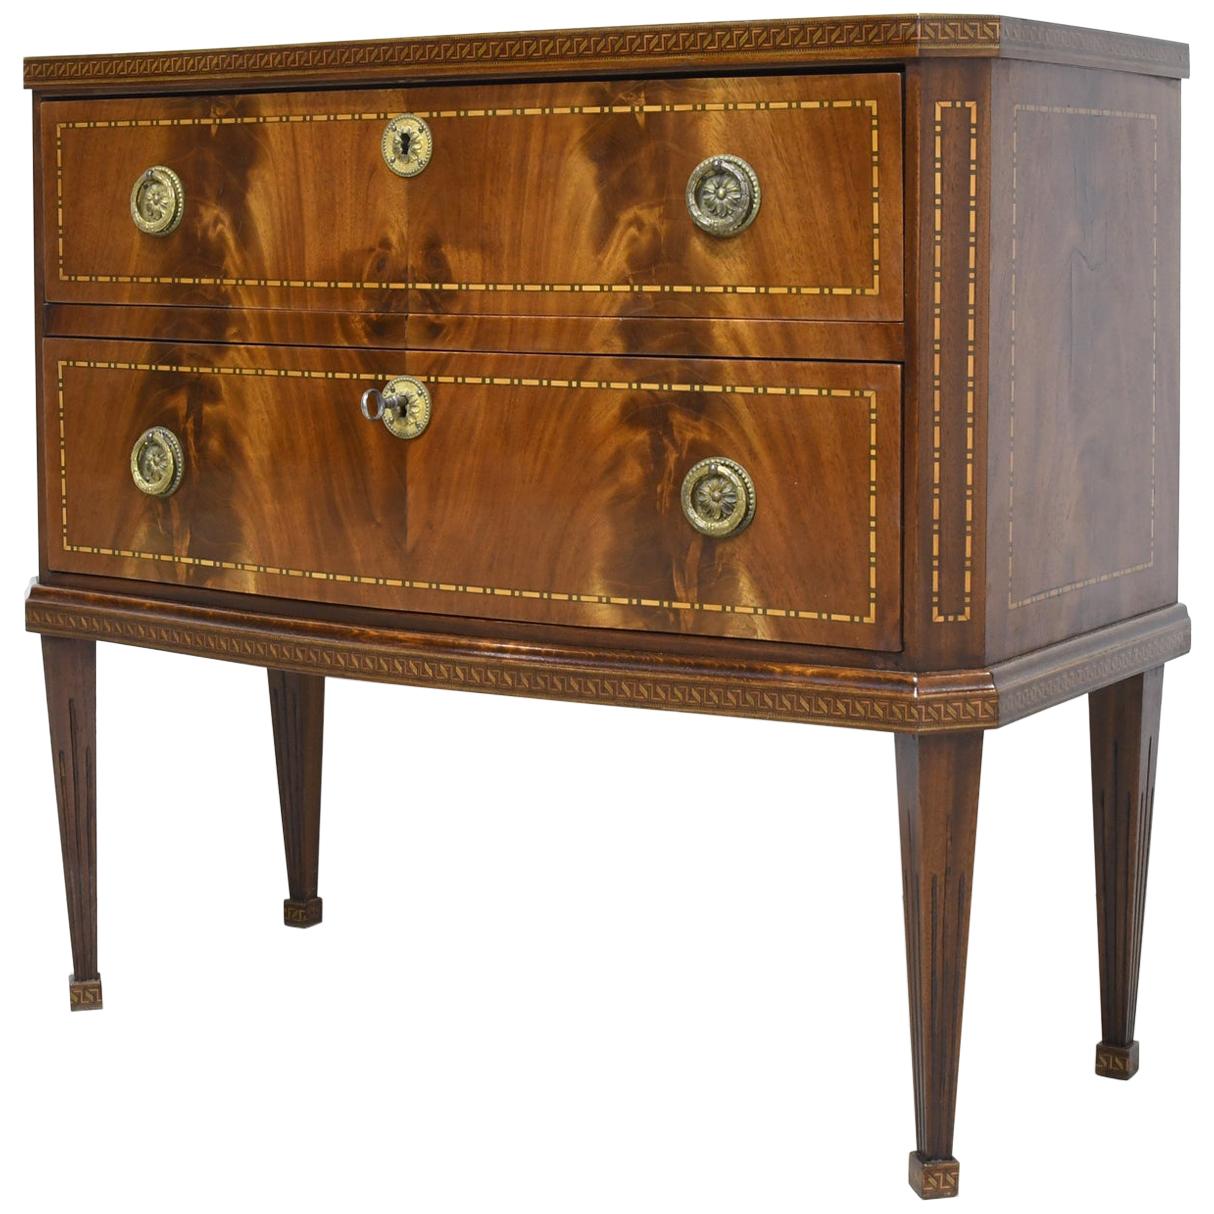 19th Century Danish Chest of Drawers in Mahogany with Marquetry Inlays